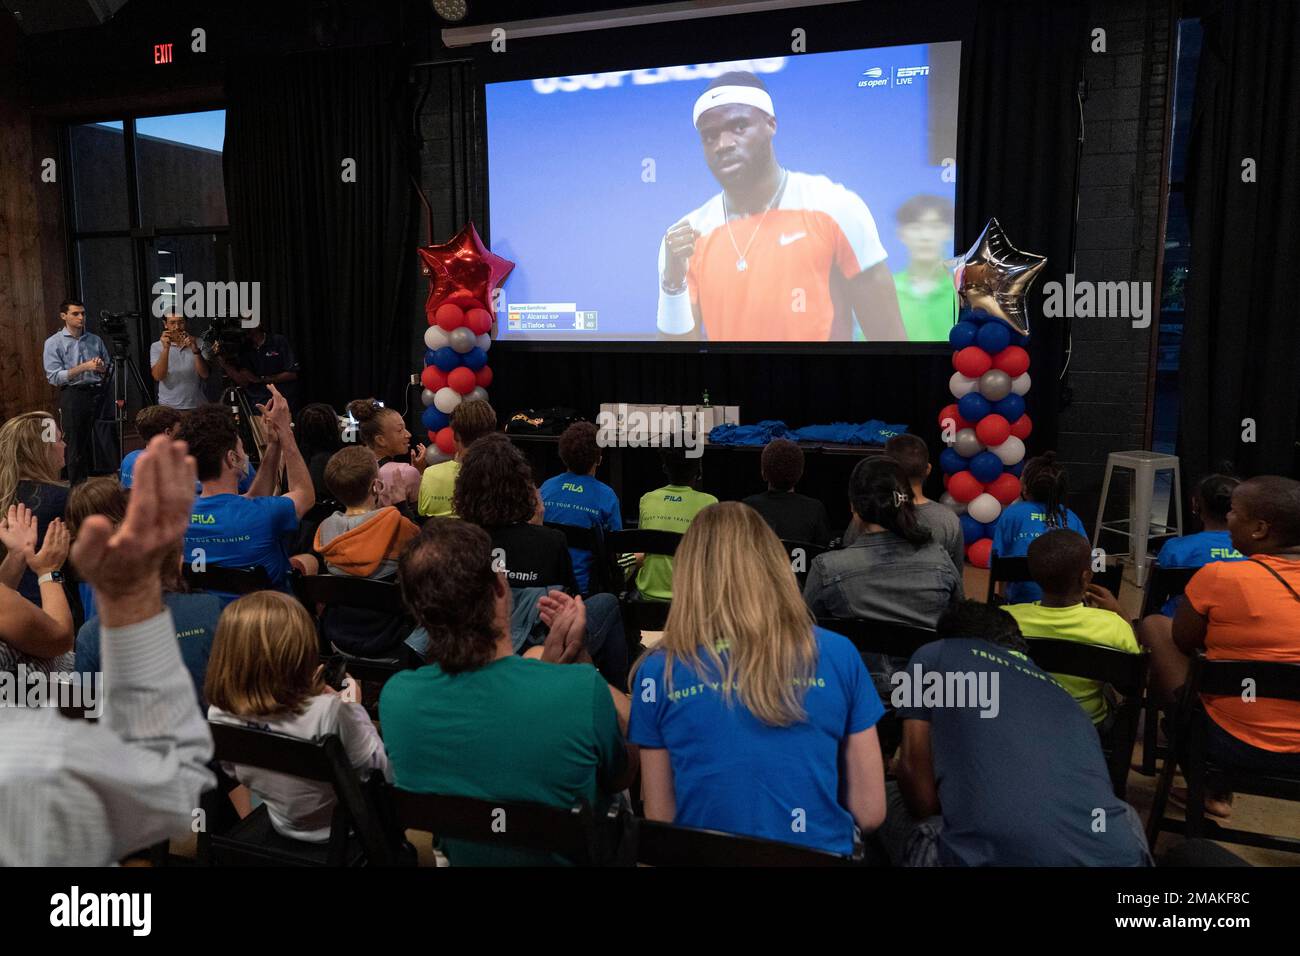 Frances Tiafoe supporters watch television coverage of the U.S